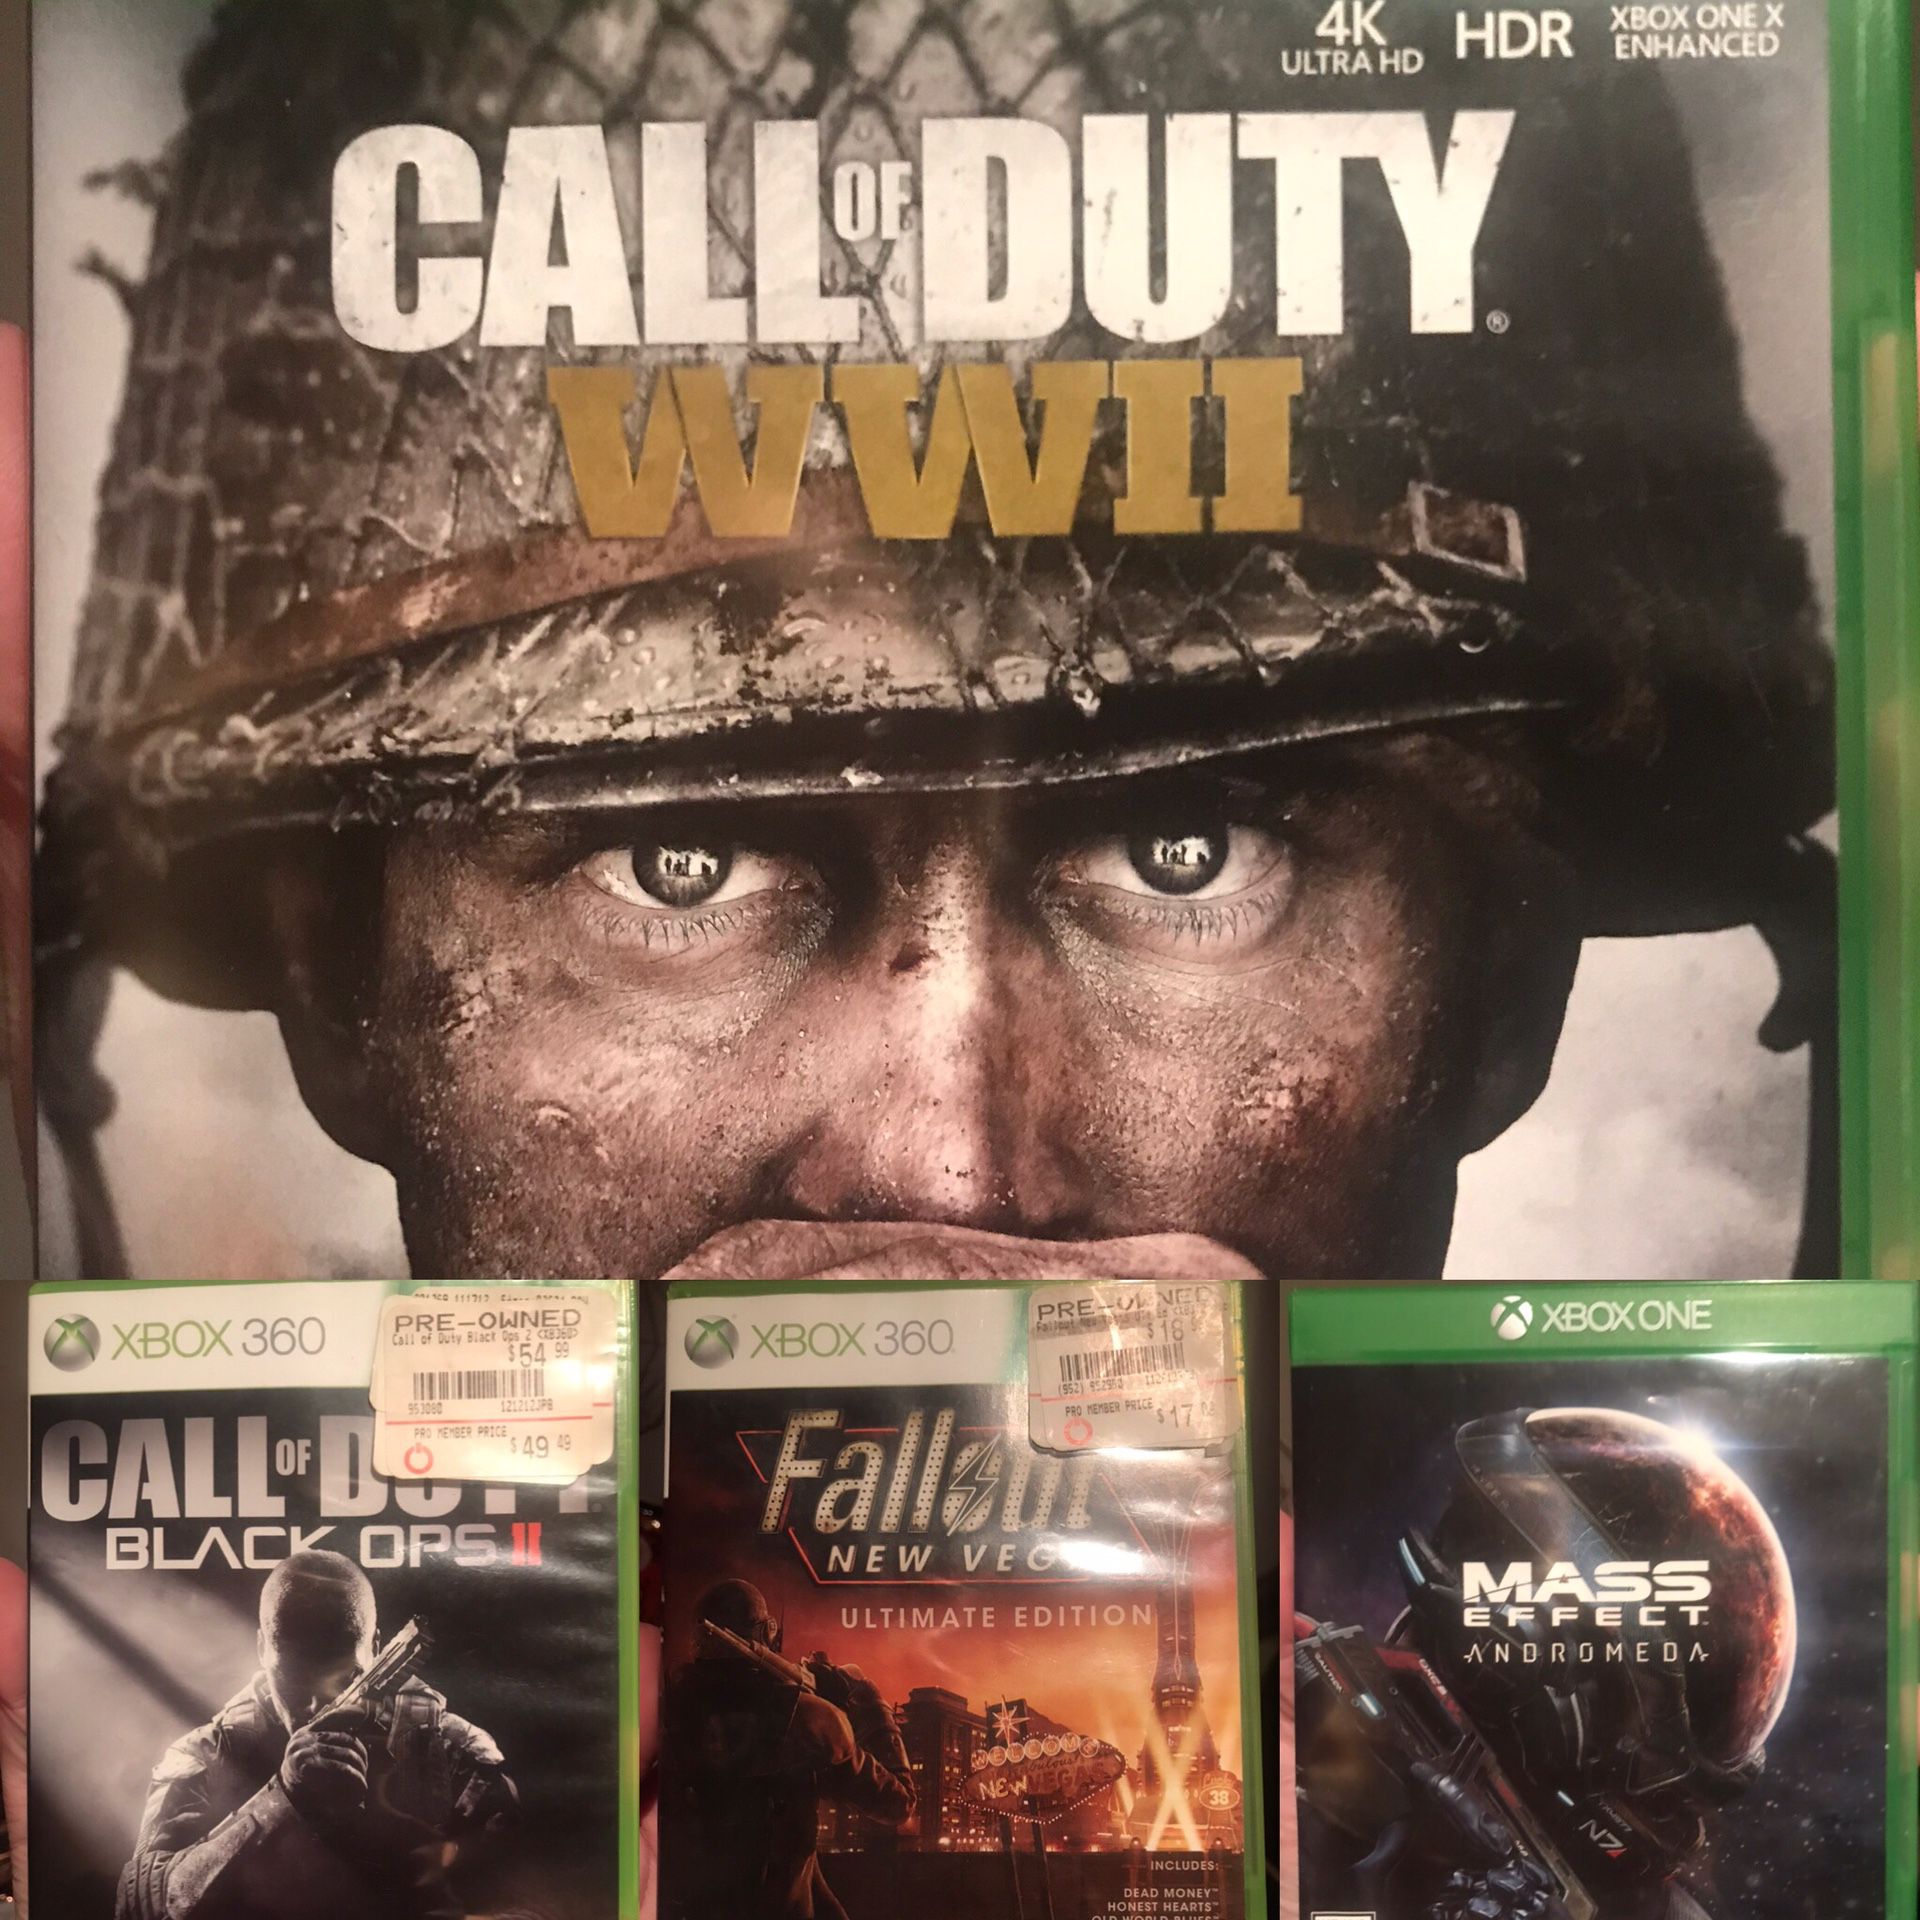 VIDEO GAMES for Xbox One • 360 • Call of Duty • Fallout • Borderlands • Fable